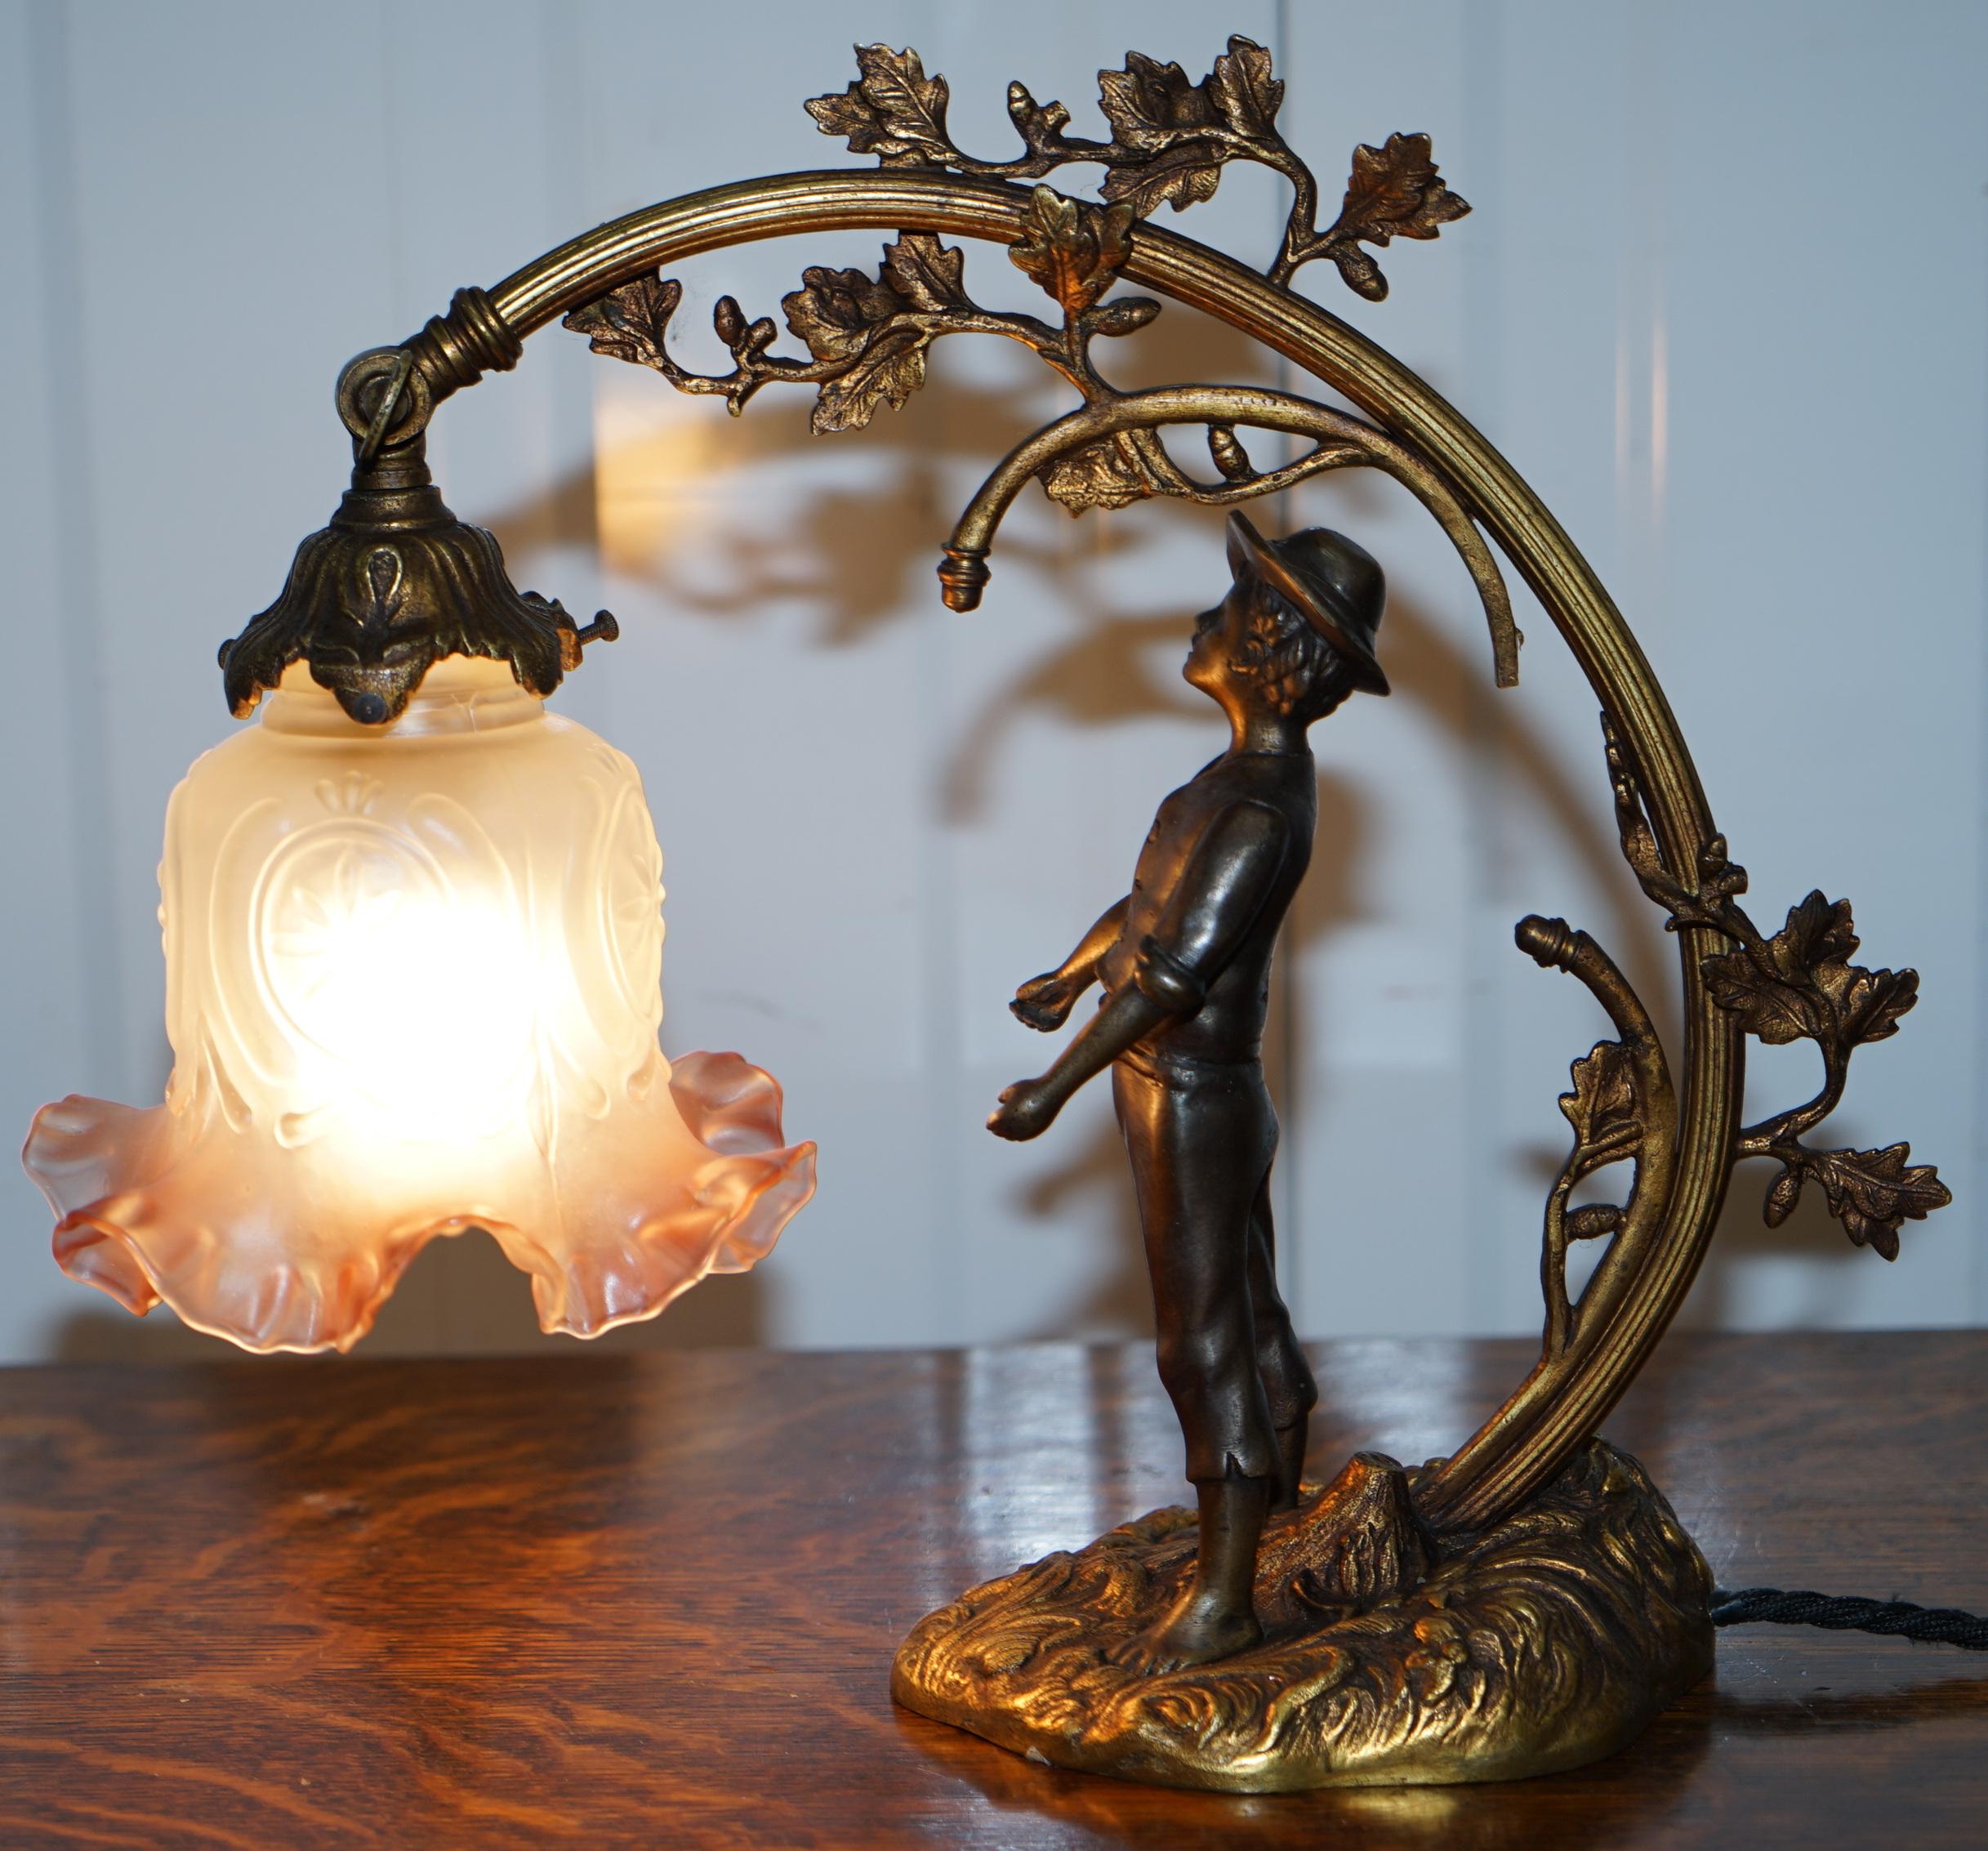 Stunning Solid Bronze circa 1920 Table Lamp with Statue Original Shade Rare Find 2